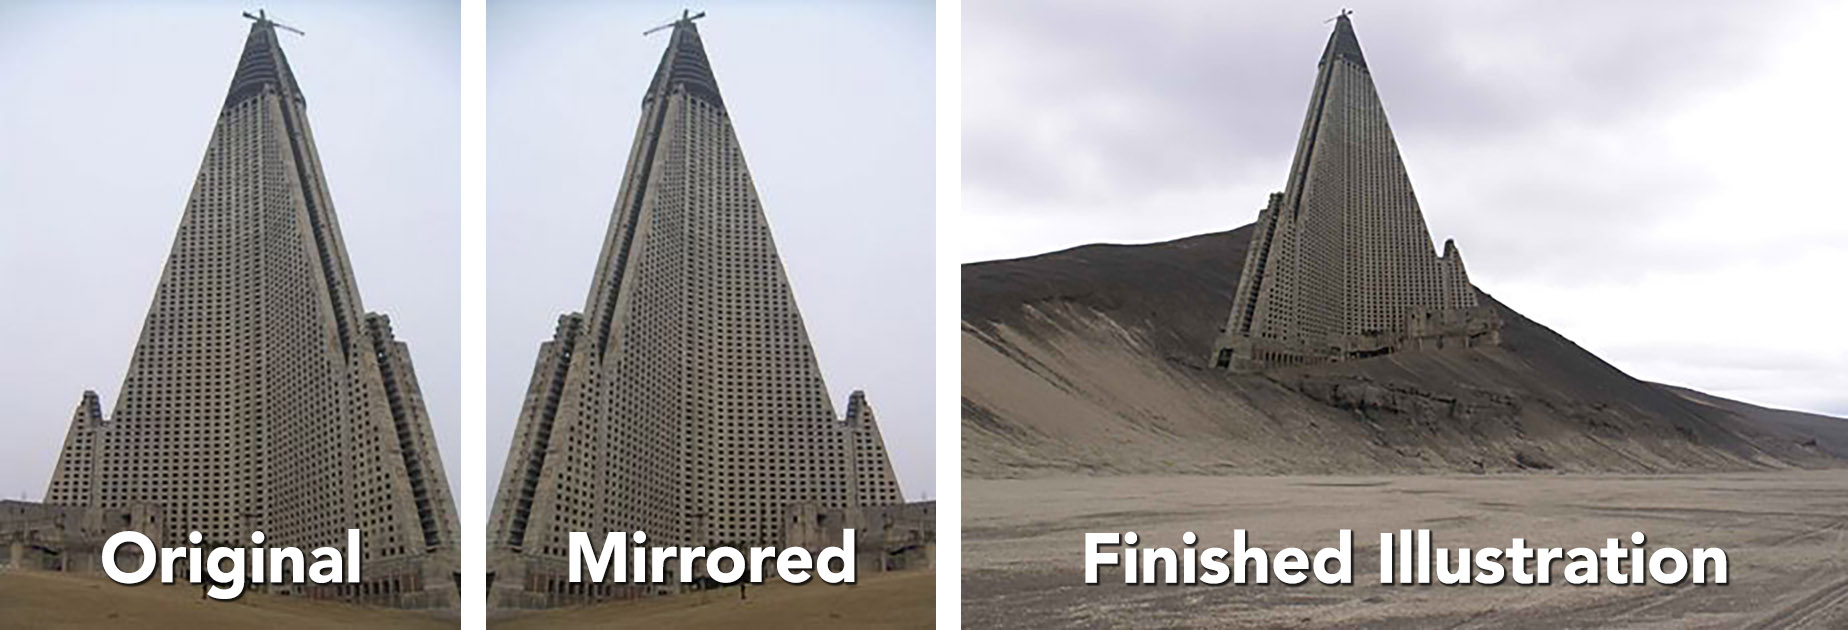 The Ryugyong Hotel picture of the pyramid building in a sand dune or dirt hill originally came from an illustration from Nicolas Moulin.